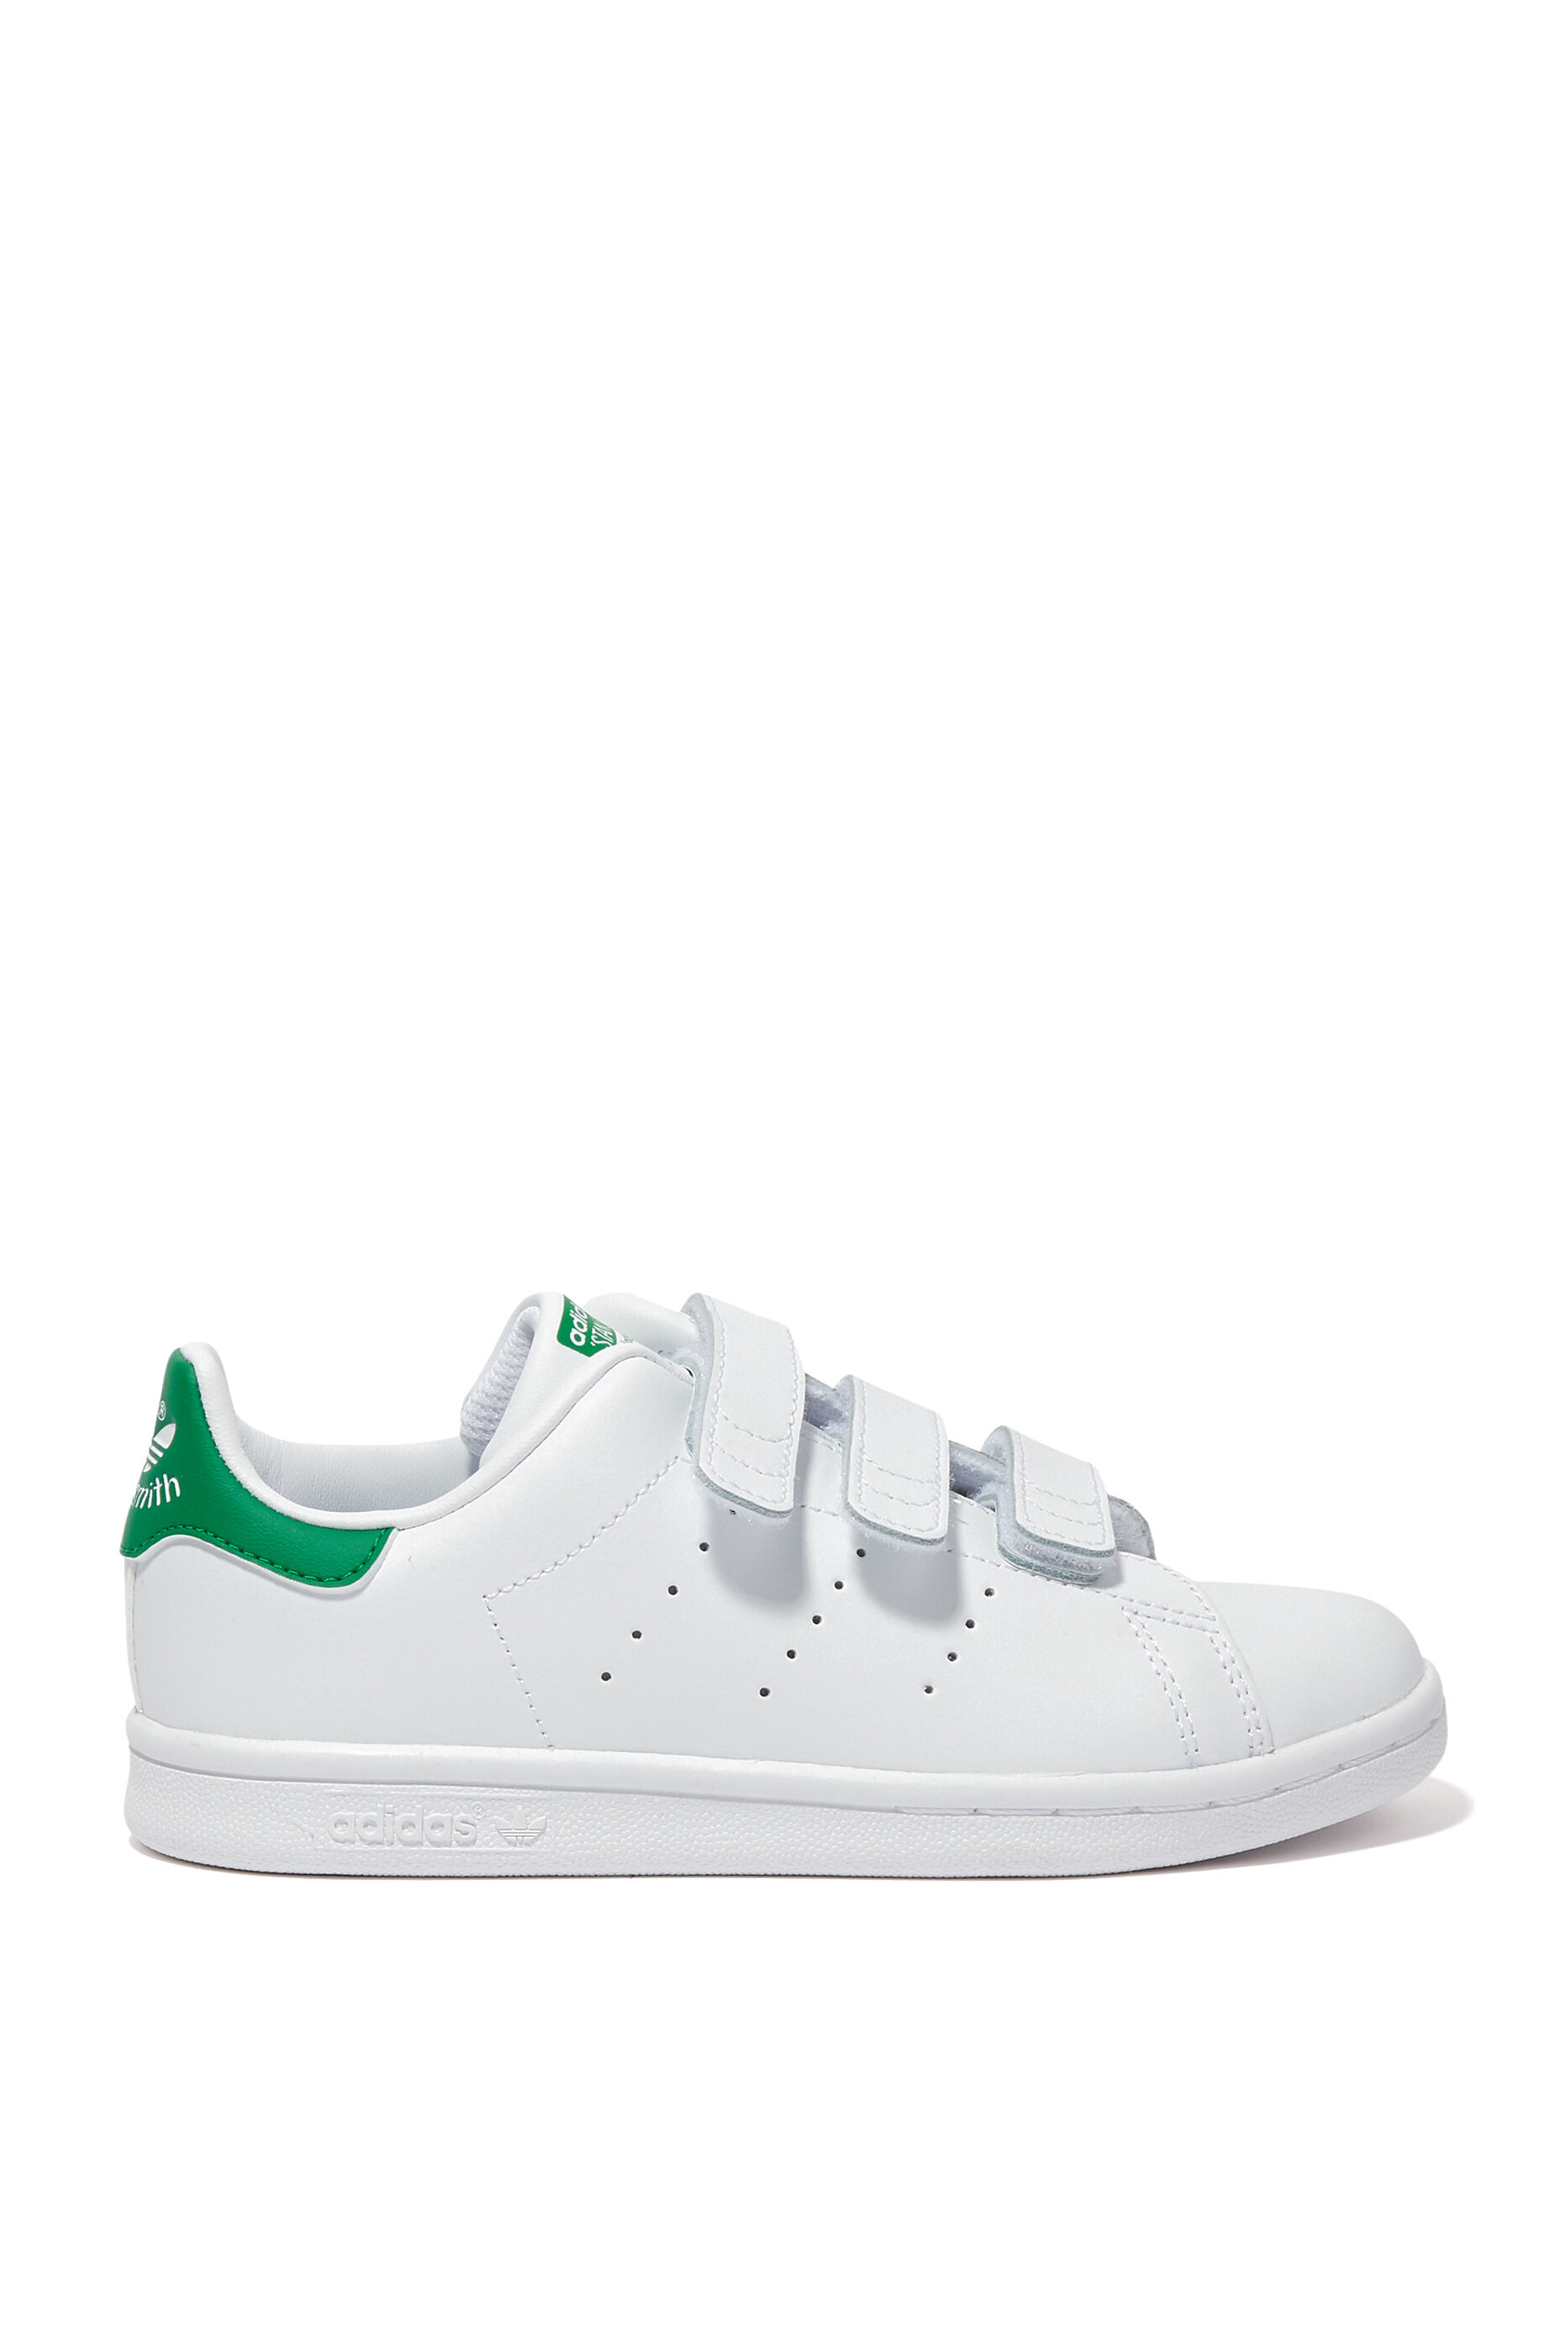 stan smith shoes for sale